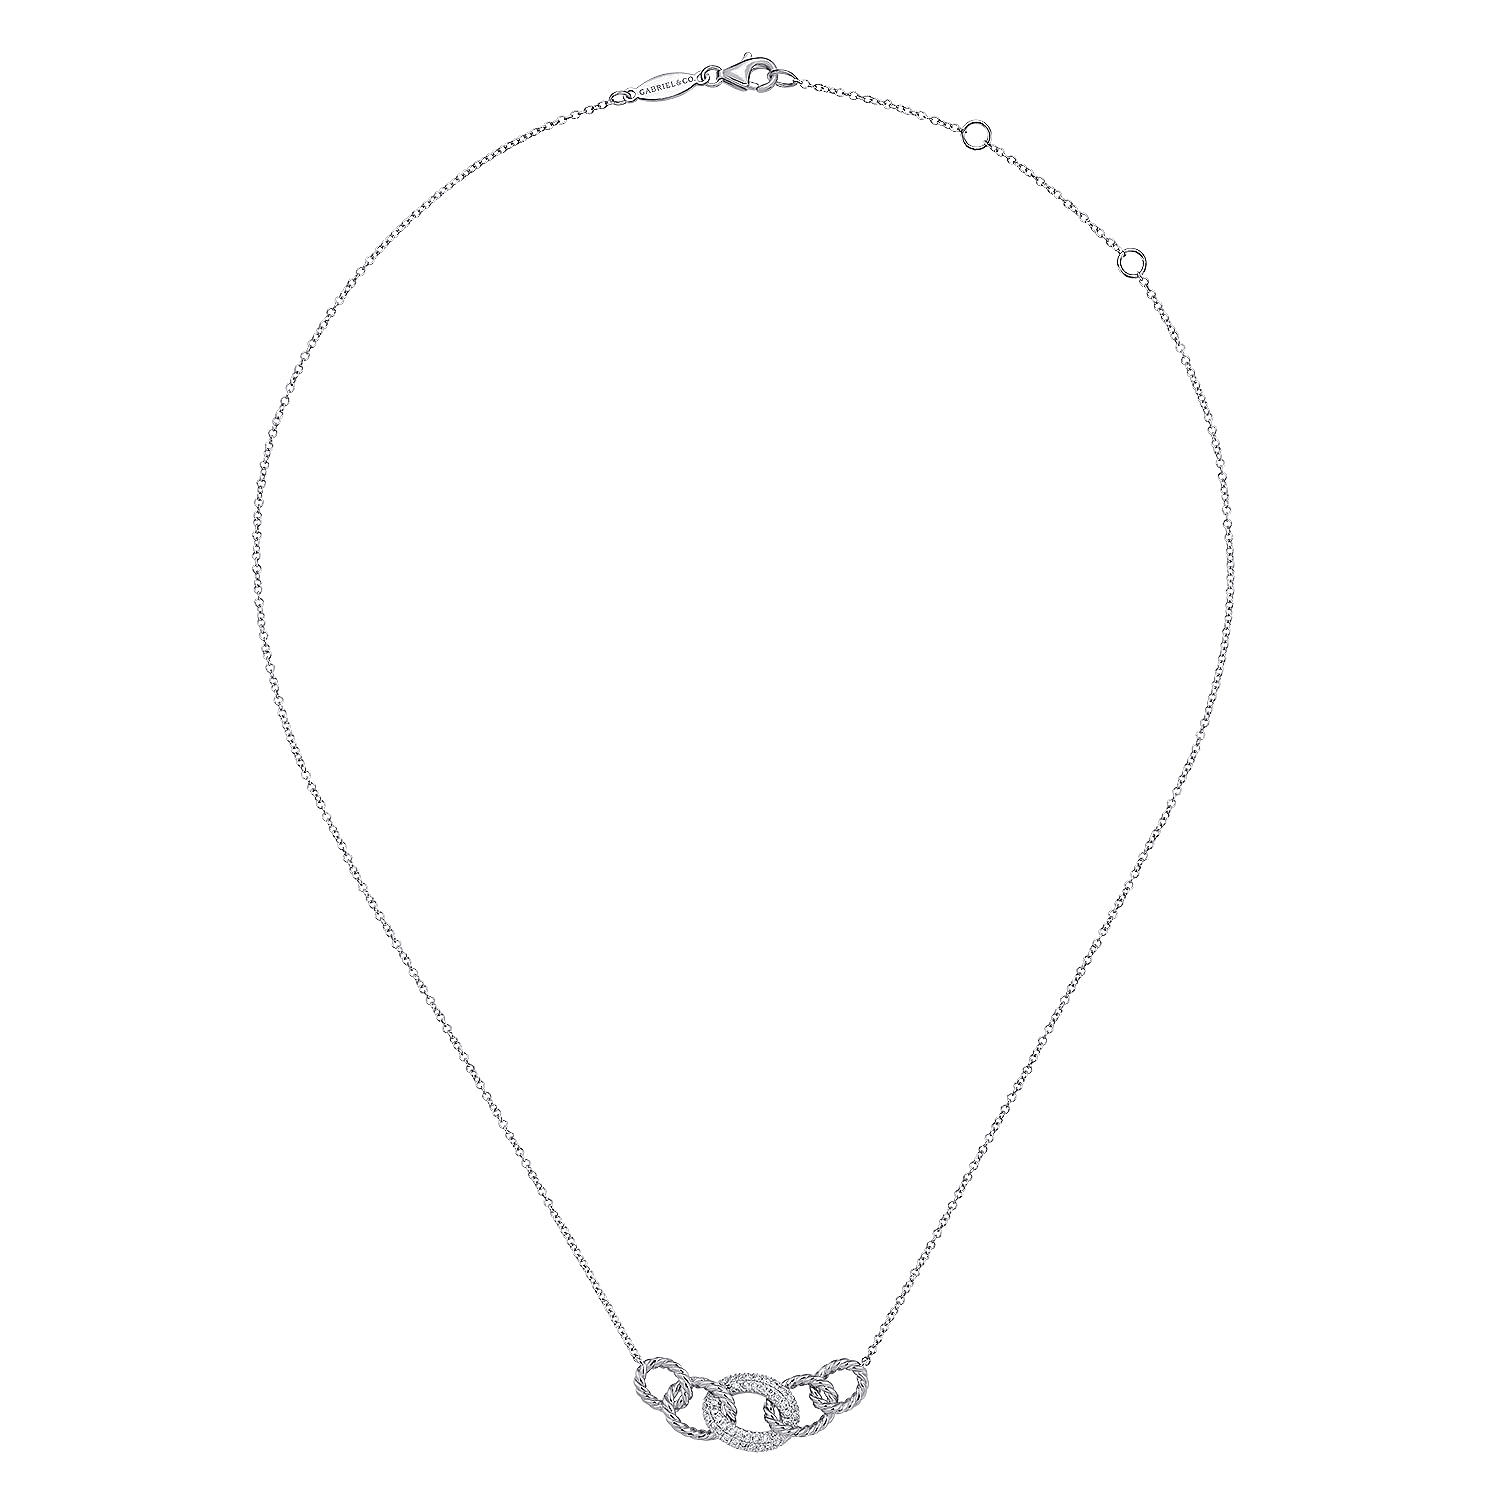 14K White Gold Twisted Rope Link Necklace with Pave Diamond Link Station - 0.21 ct - Shot 2